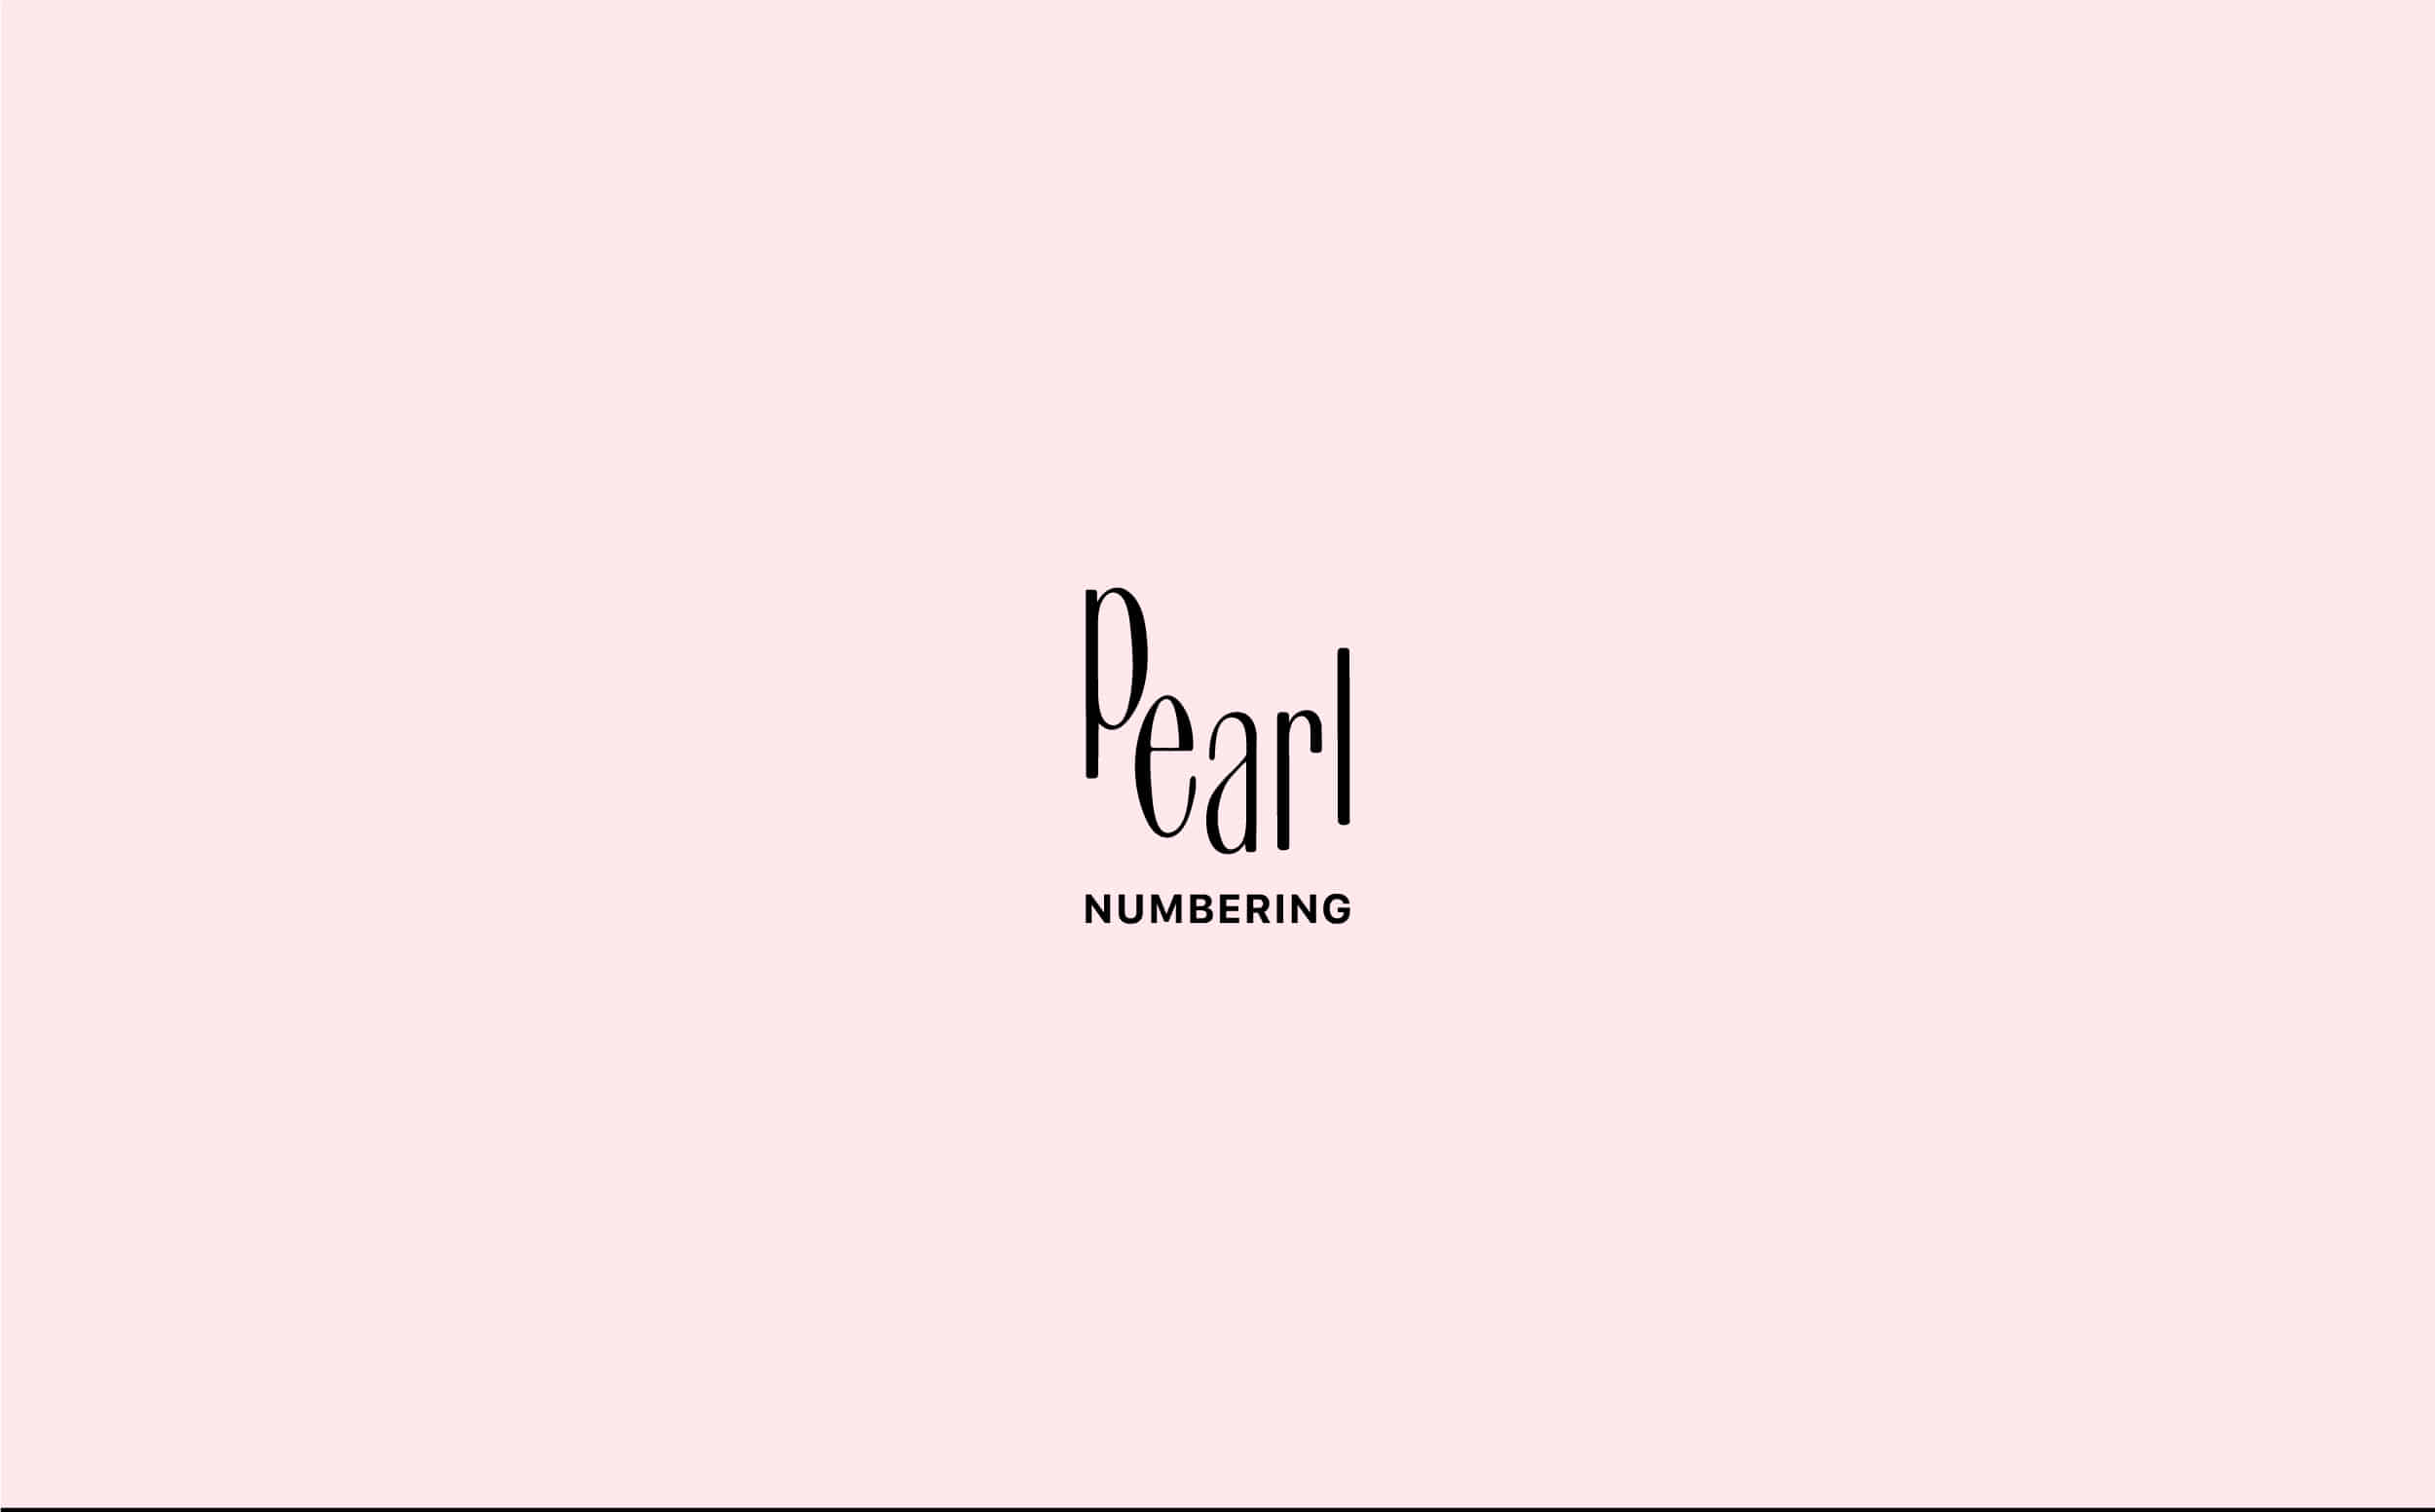 pearl numbering about